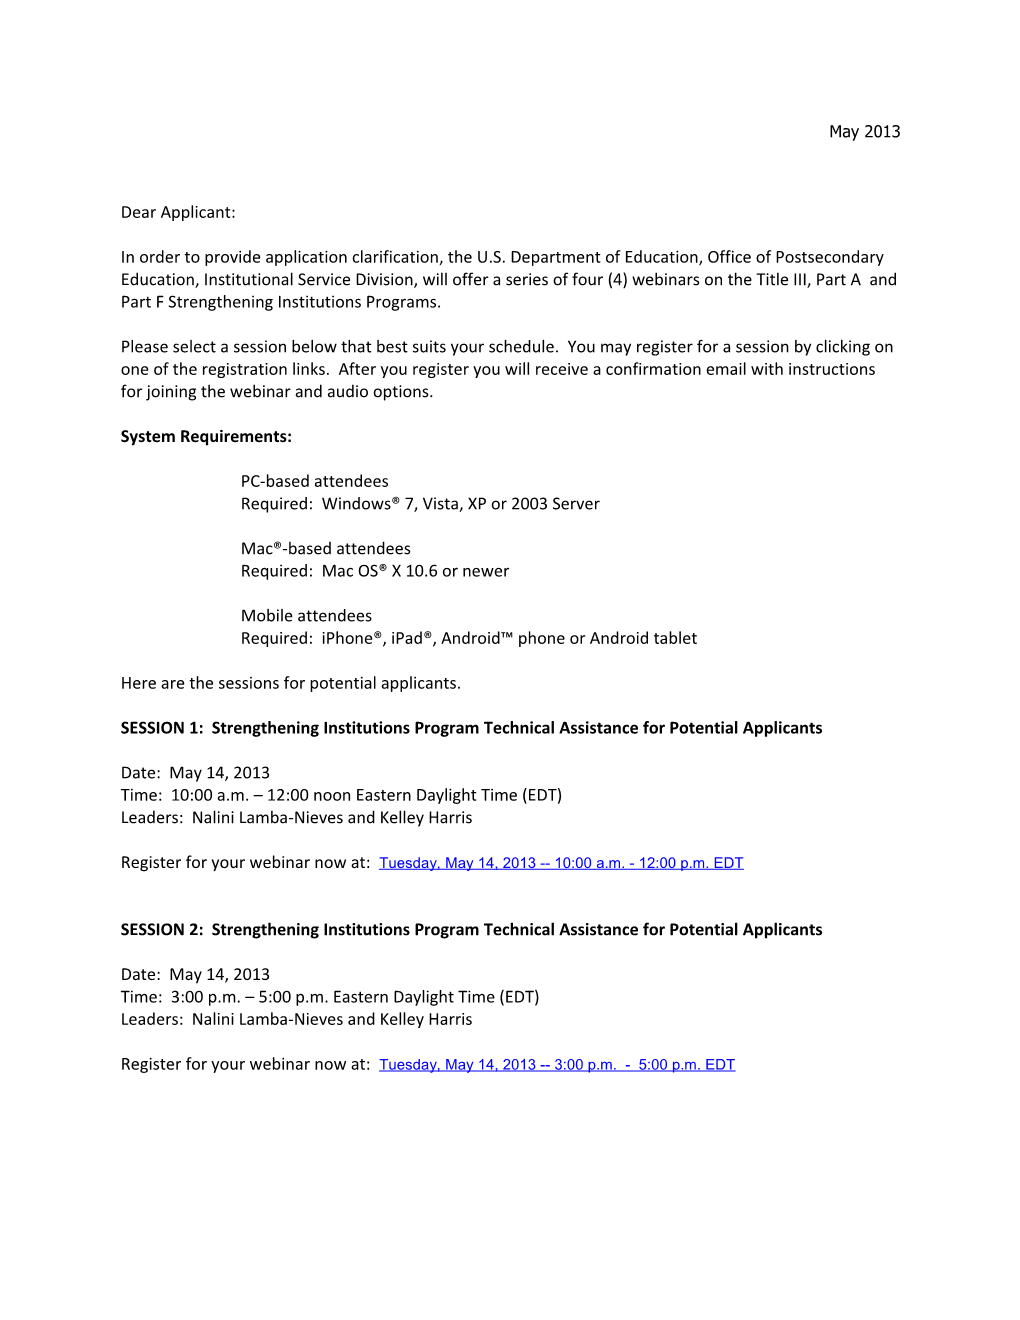 Letter to Applicants About the FY 2013 Webinars for Title III Strengthening Institutions